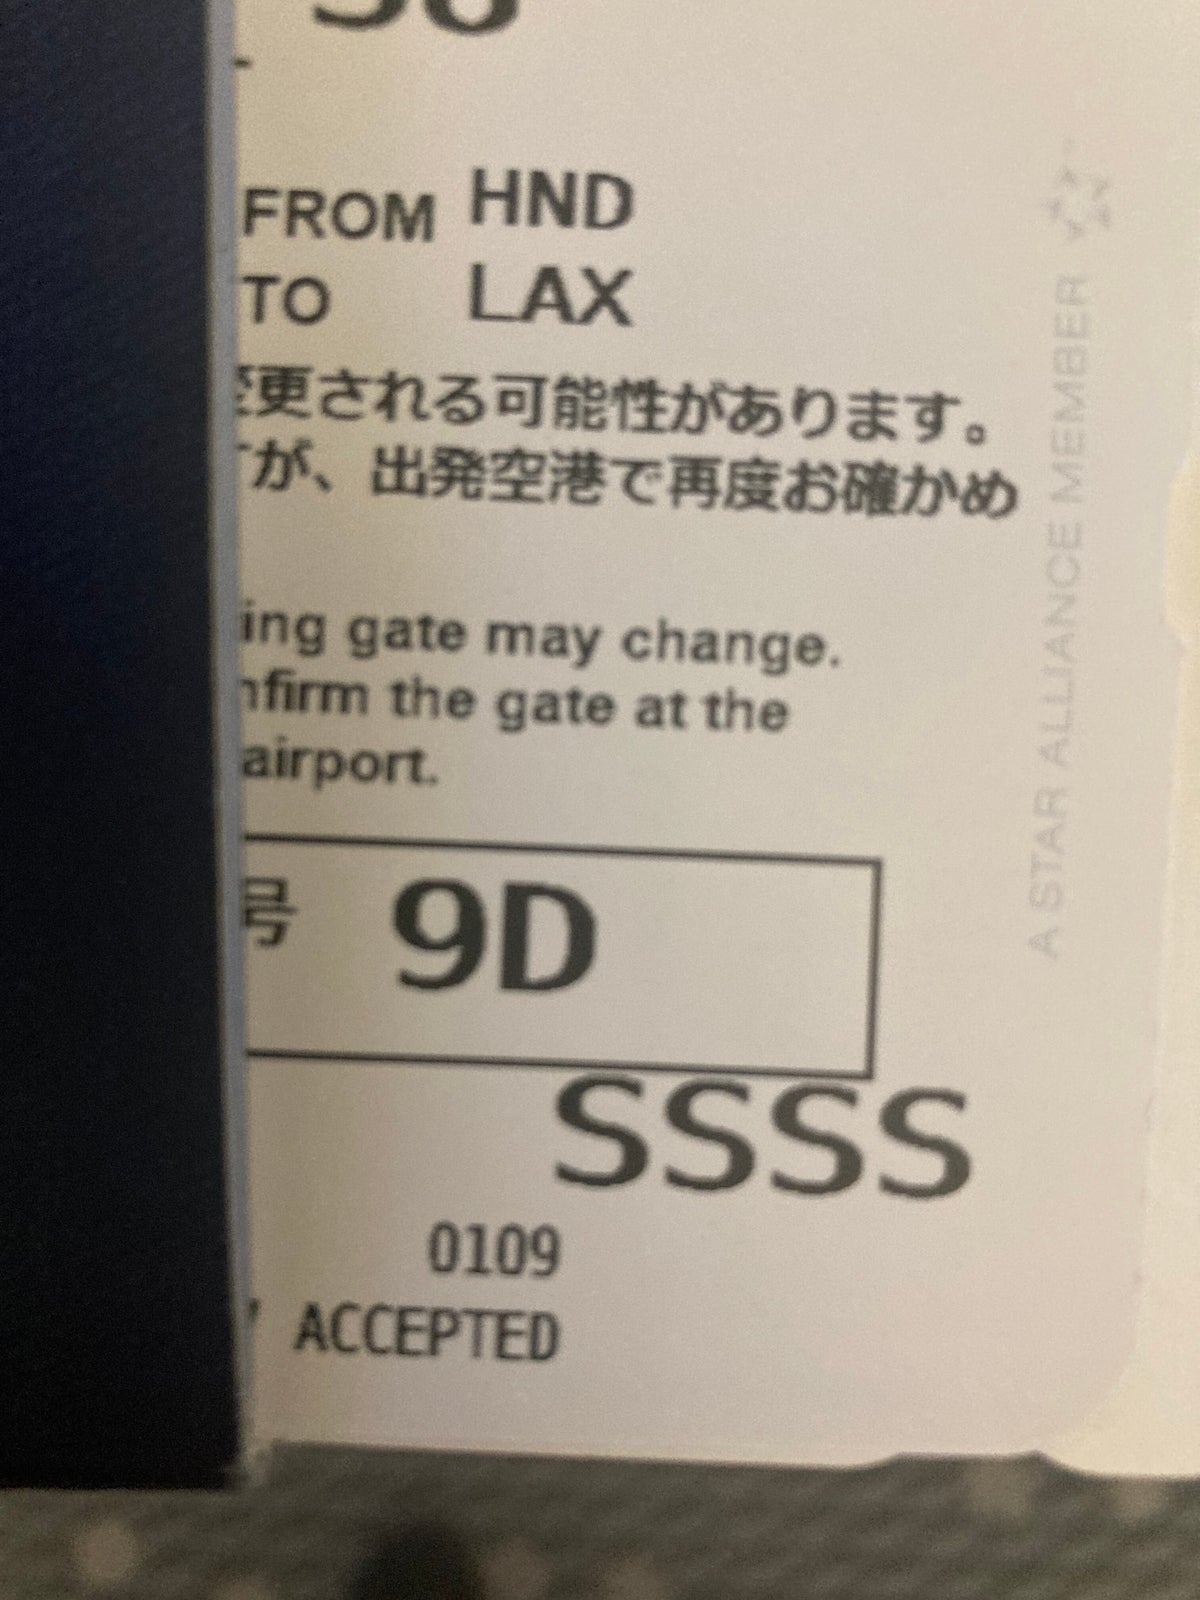 United Polaris business class ticket with SSSS